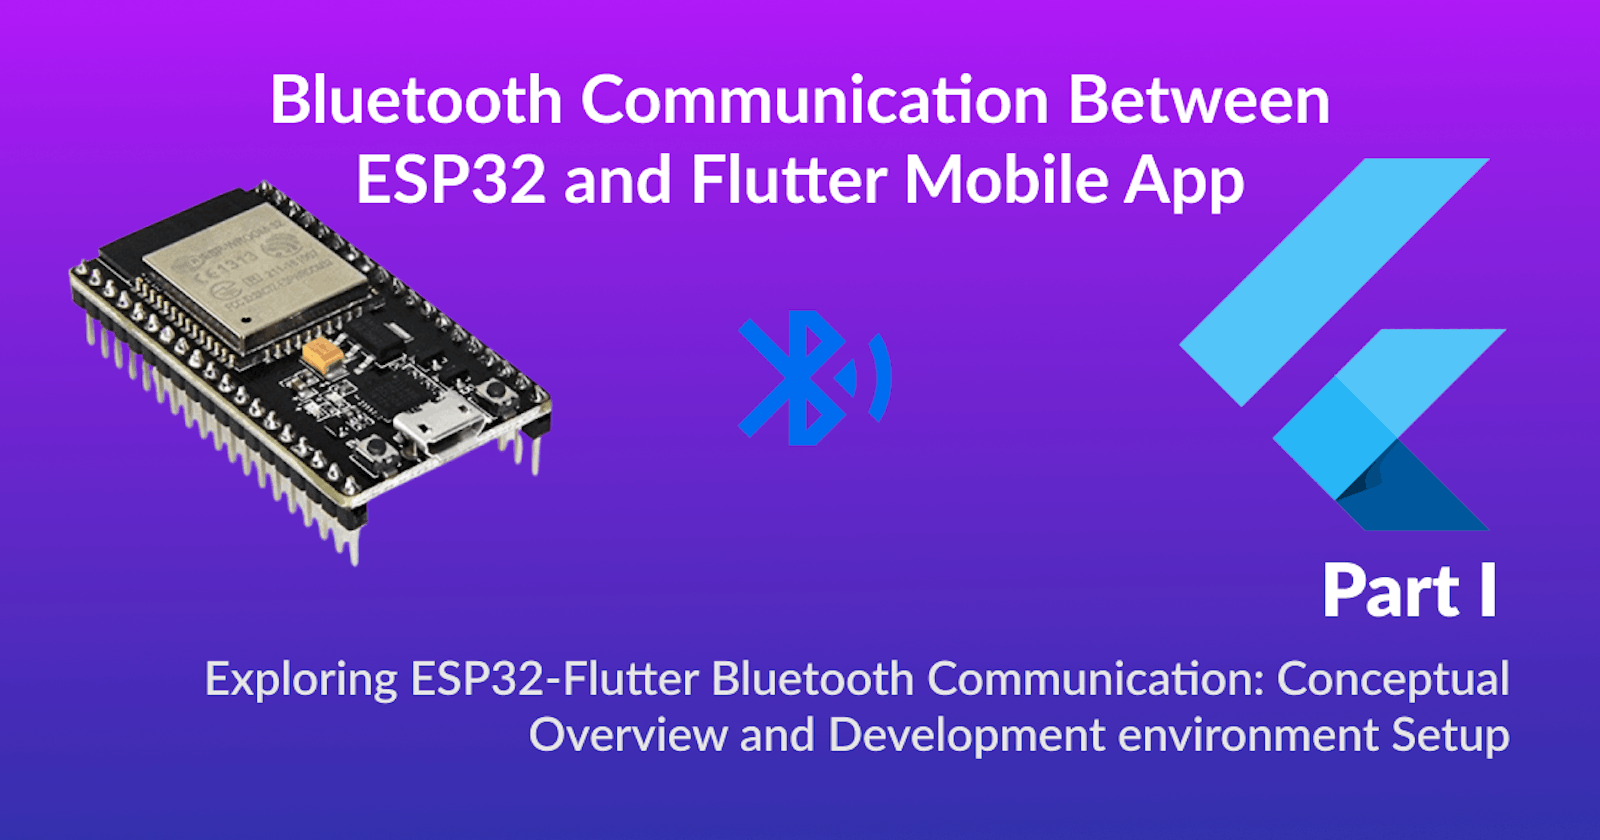 Building a Bluetooth Communication Interface Between ESP32 and Flutter Mobile App for Configurable Settings